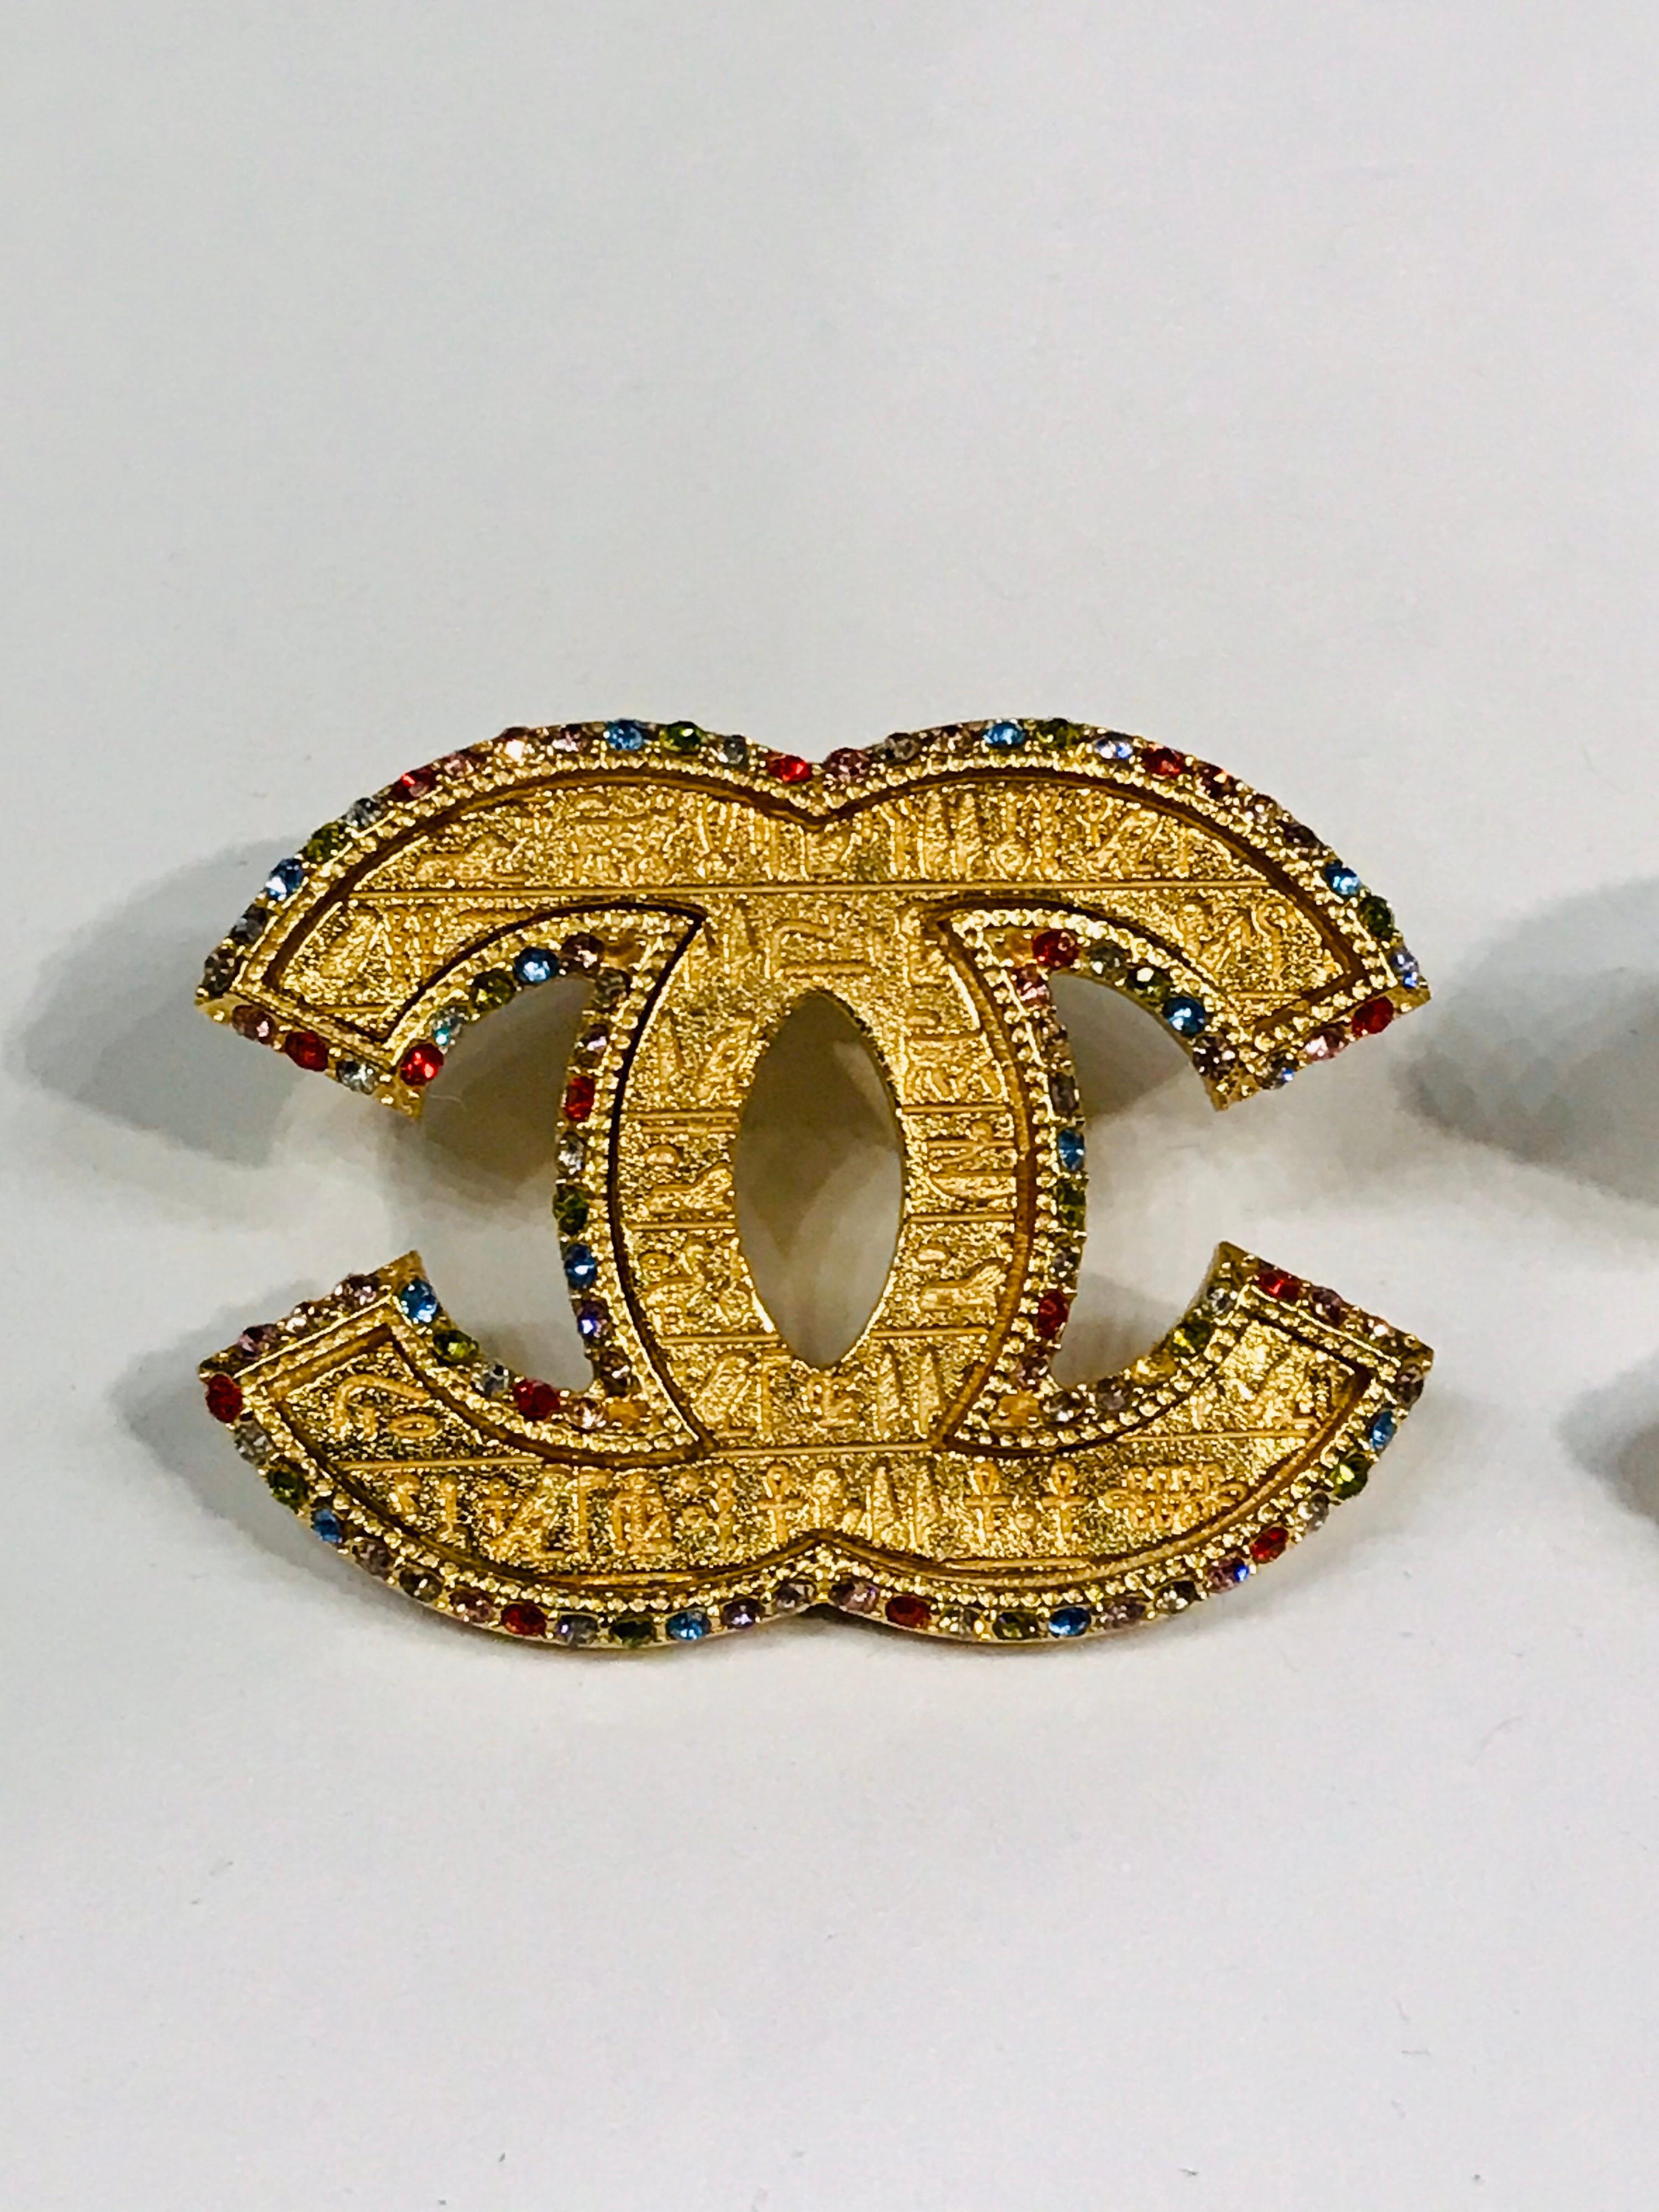 From the 2019 Metiers d’Art collection is this lovely pair of Chanel interlocking CC logo earrings inscribed with Egyptian hieroglyphs and  ser with multicolor rhinestones in red, green, blue, pink, clear and smoke. Each earring measures 1.24 inches